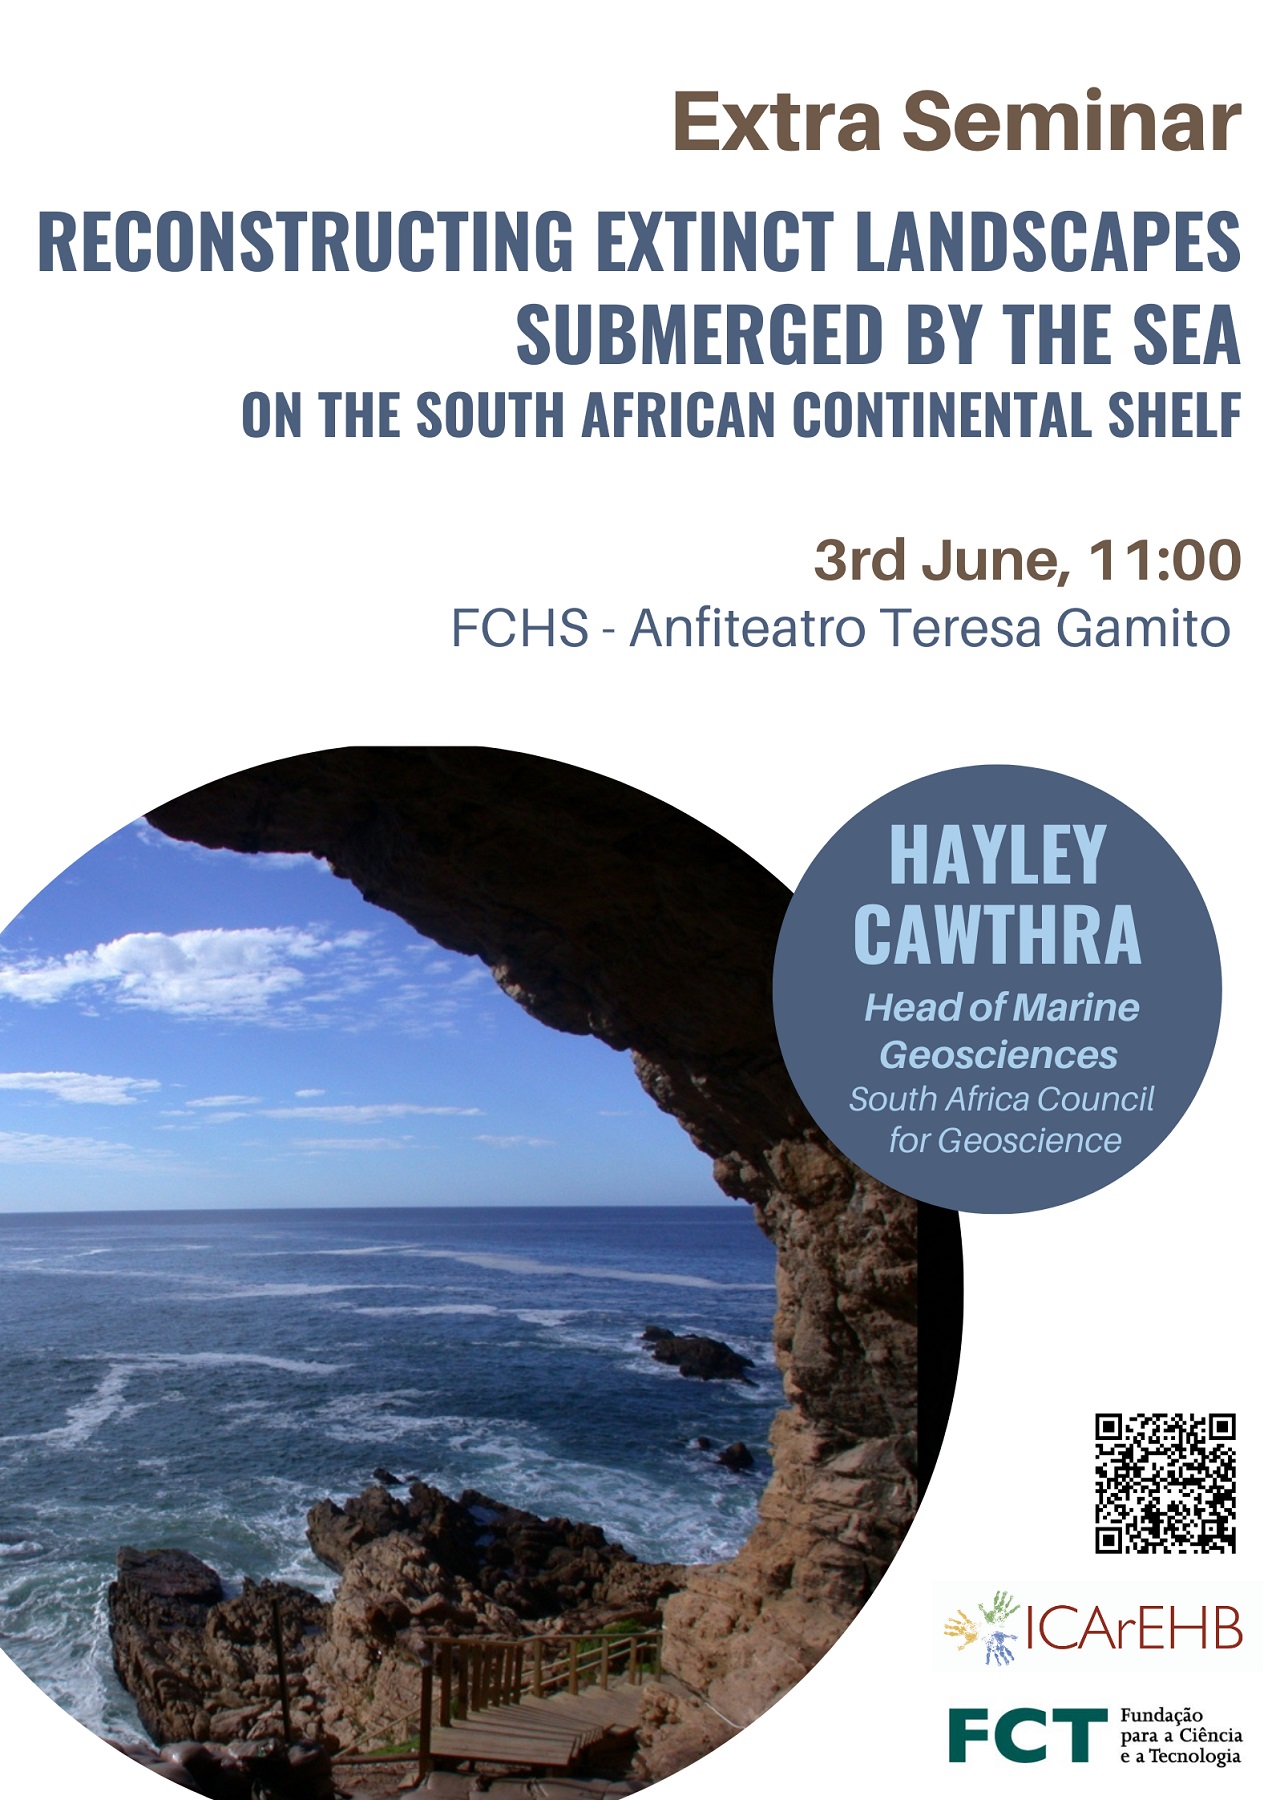 Extra Seminar: “Reconstructing extinct landscapes submerged by the sea on the South African continental shelf”